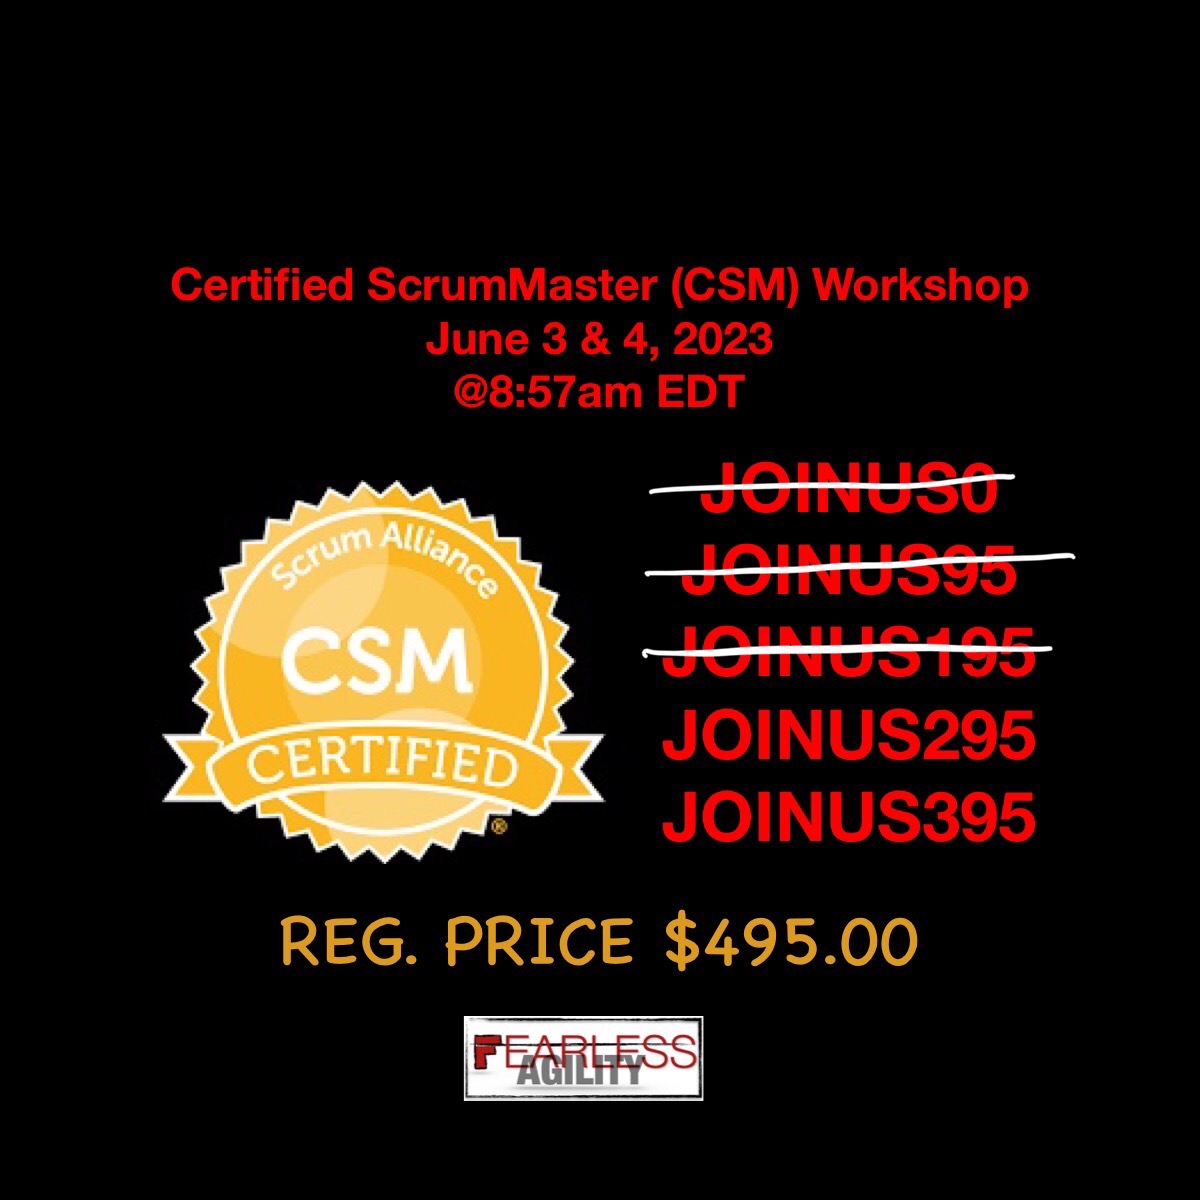 You still have time to register...

fearlessagility.com/fearless-publi…

#womenwhocode #womenintech #blacktechtwitter #scrum #techtwitter #tech #blackwomenintech #certification #scrummaster #scrummastercertification #scrummastertraining #CSM #CSM2023 #scholarships #scholarship #scholarships